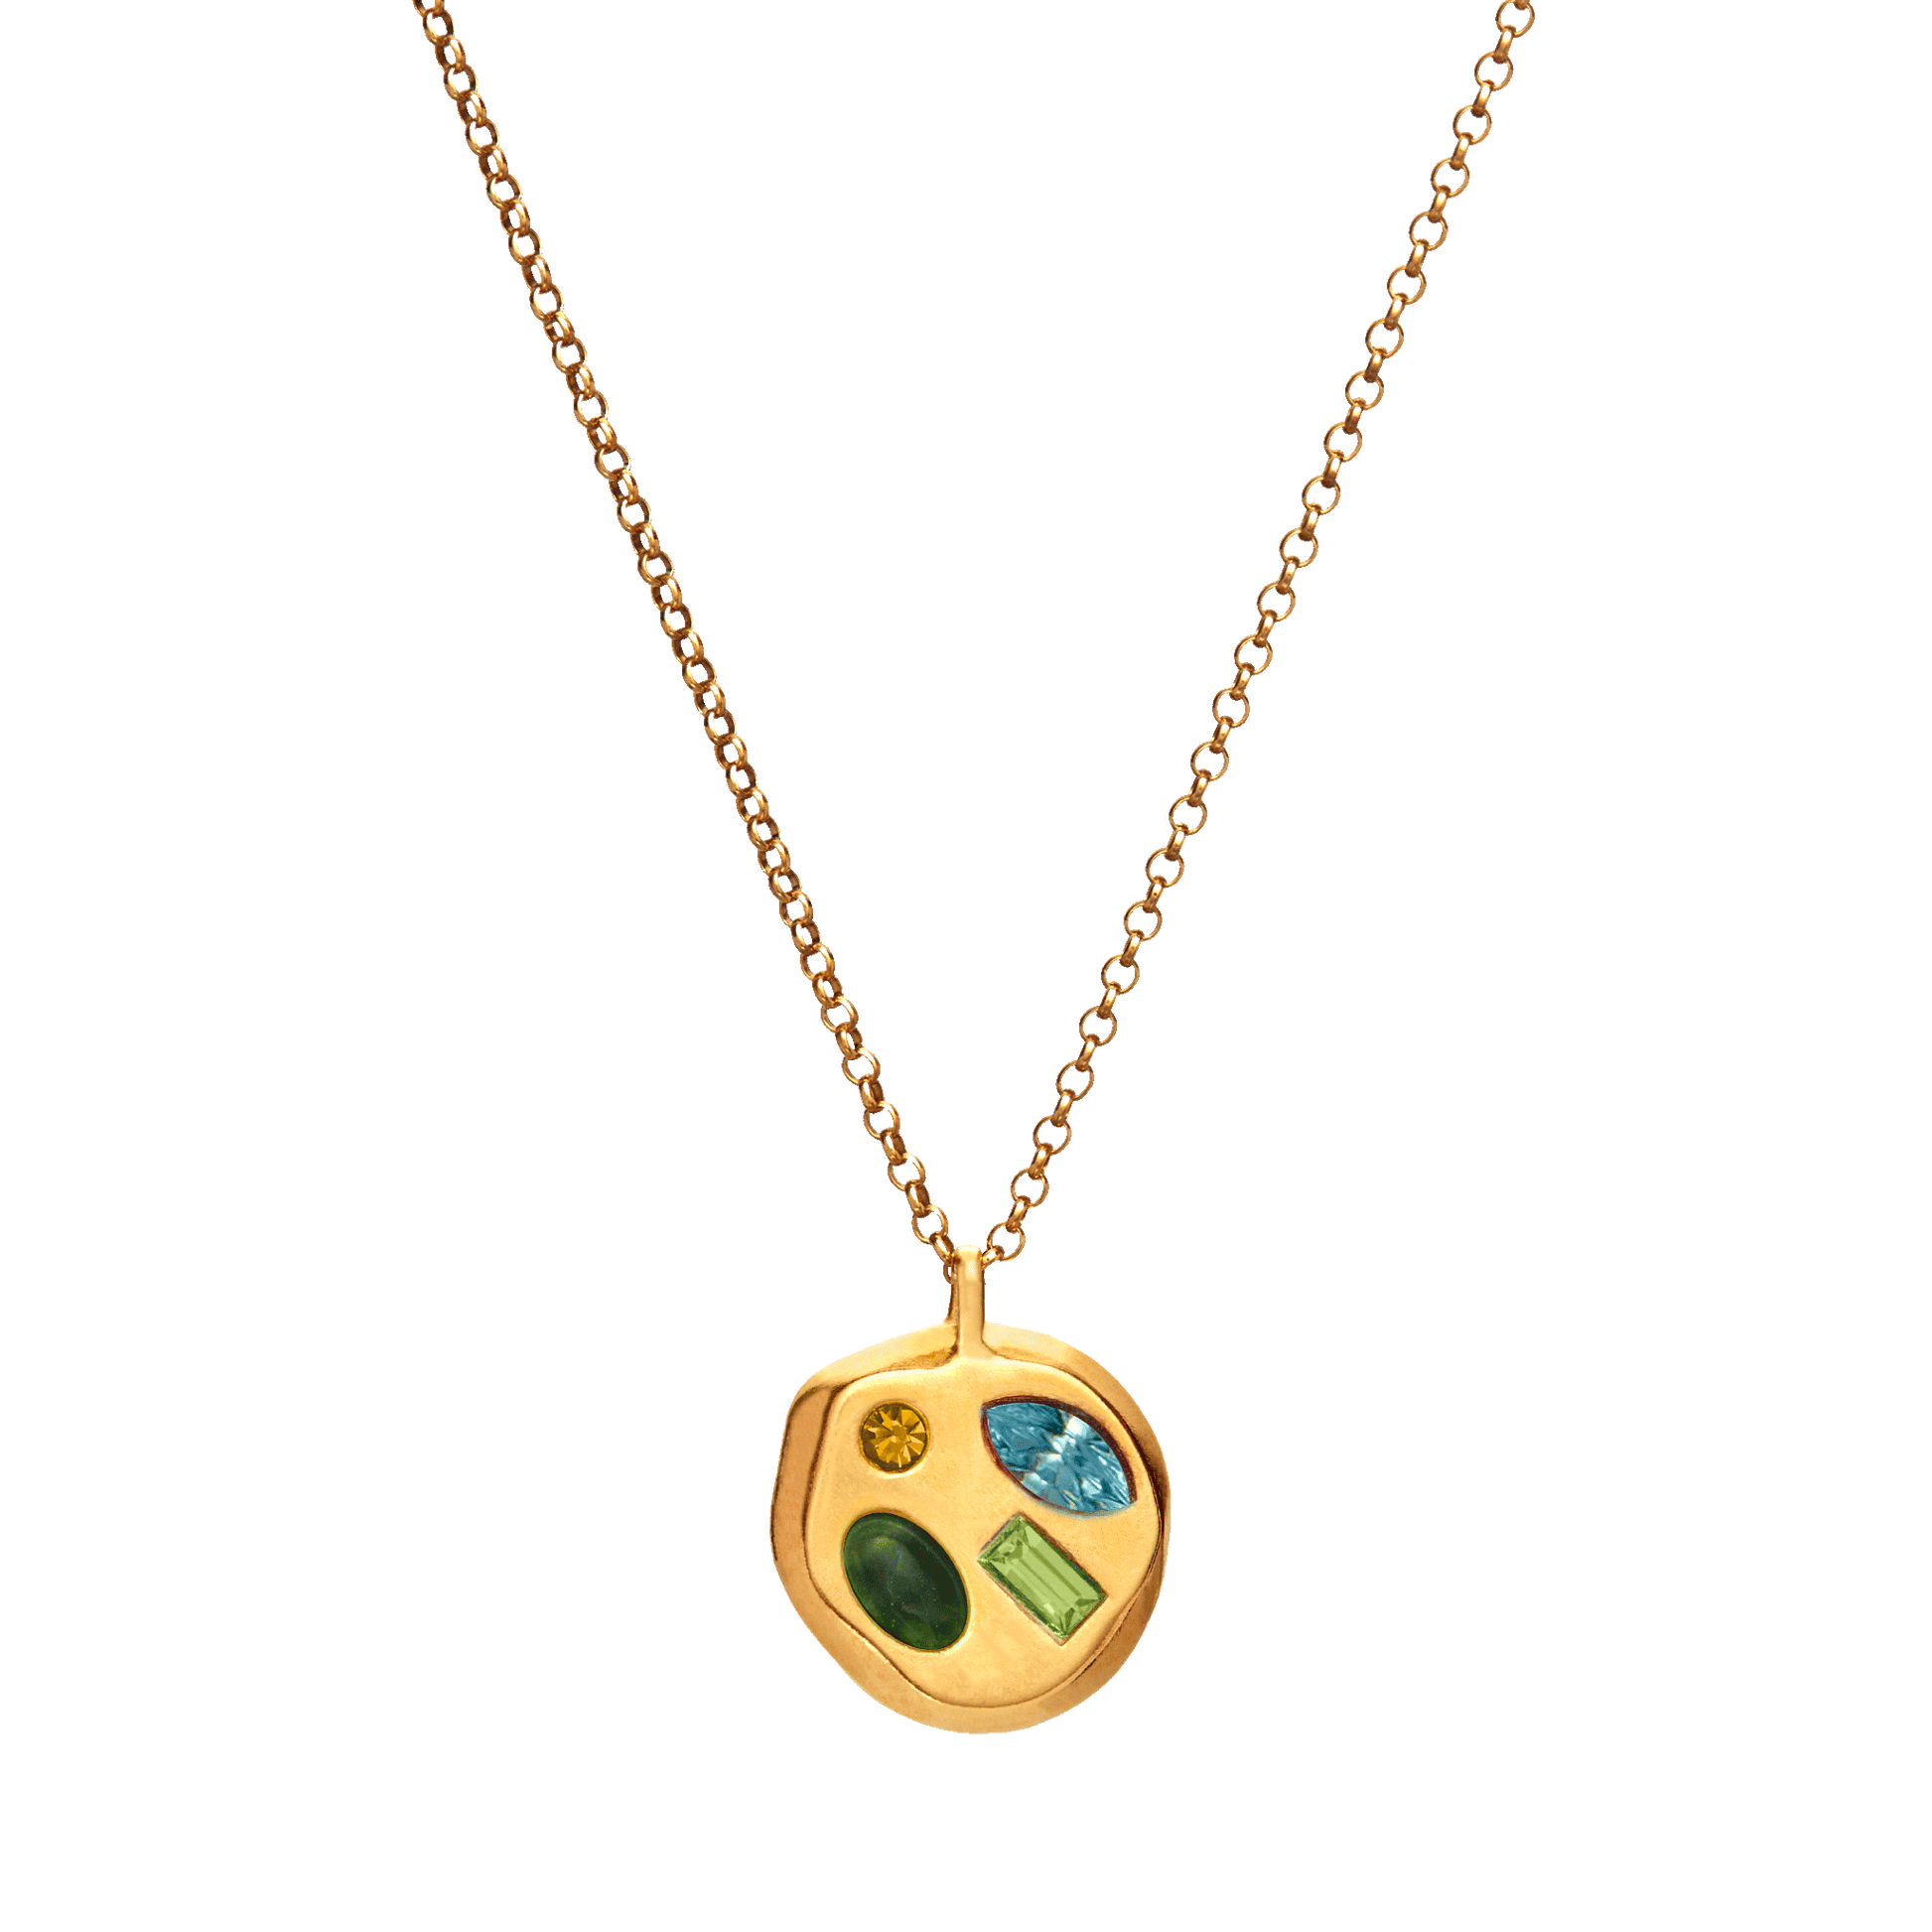 The March Eighth Pendant